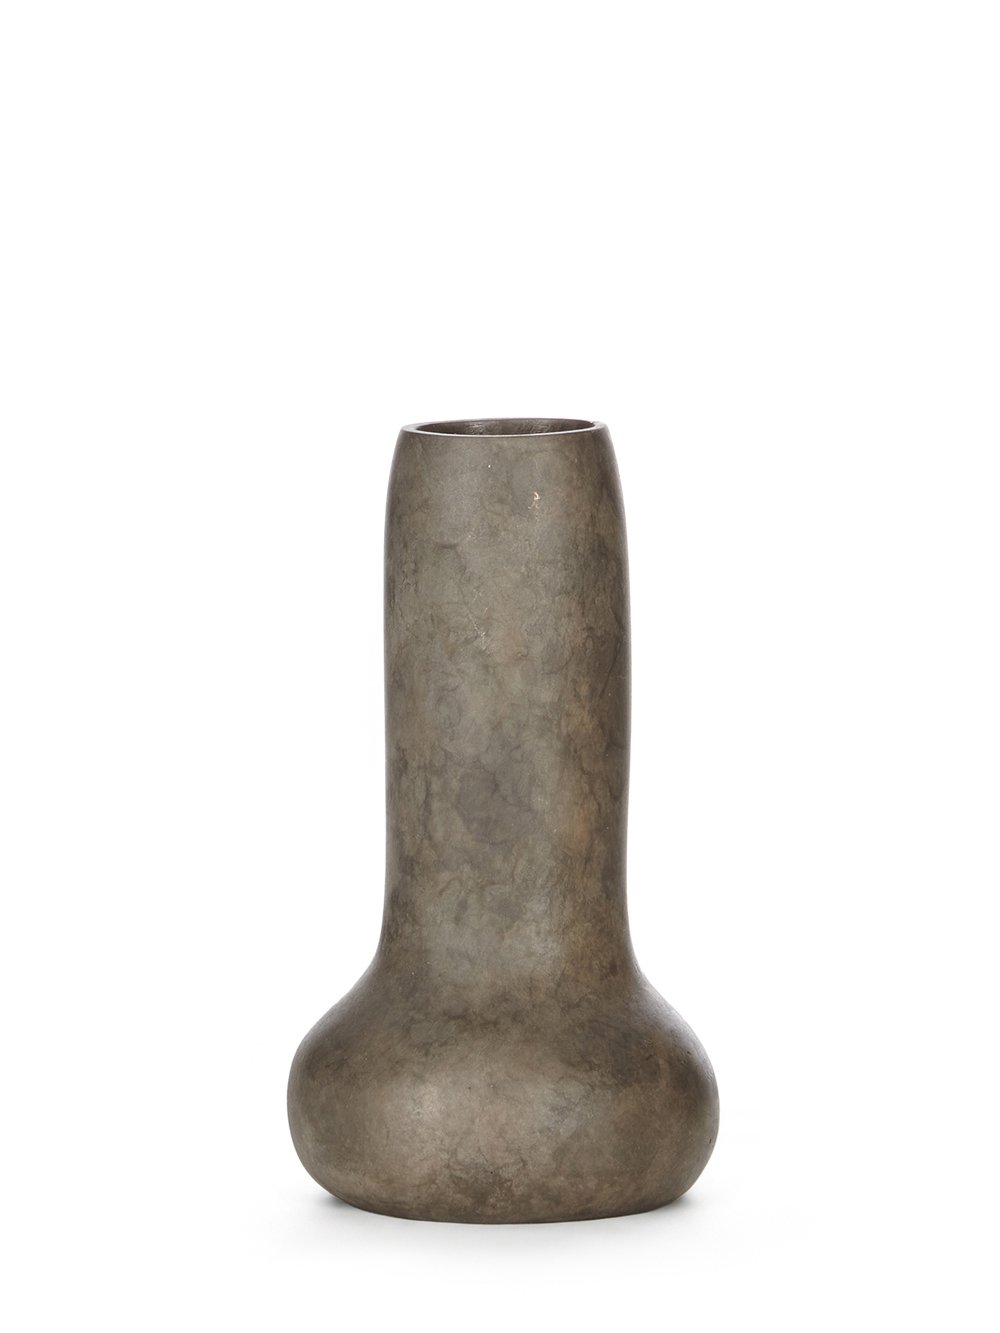 RICK OWENS BUD VASE IN NITRATE BRONZE FEATURES A OVAL SHAPE BOTTOM AND A MIDI-LENGTH NECK.